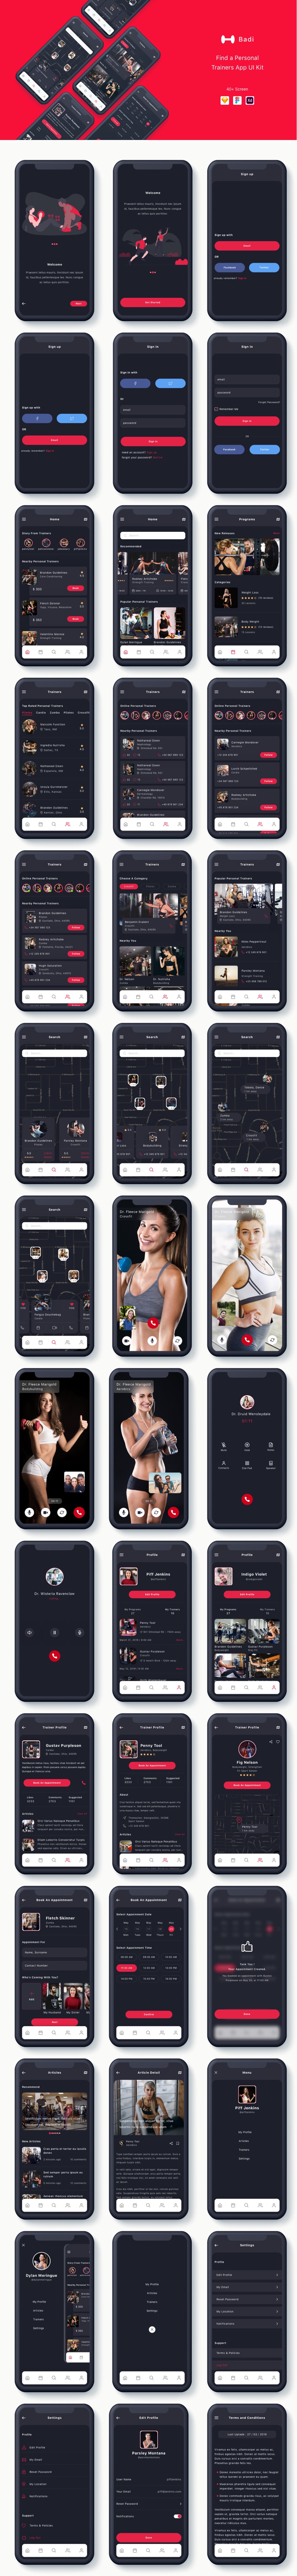 Badi - Find a Personal Trainers App UI Kit - 2